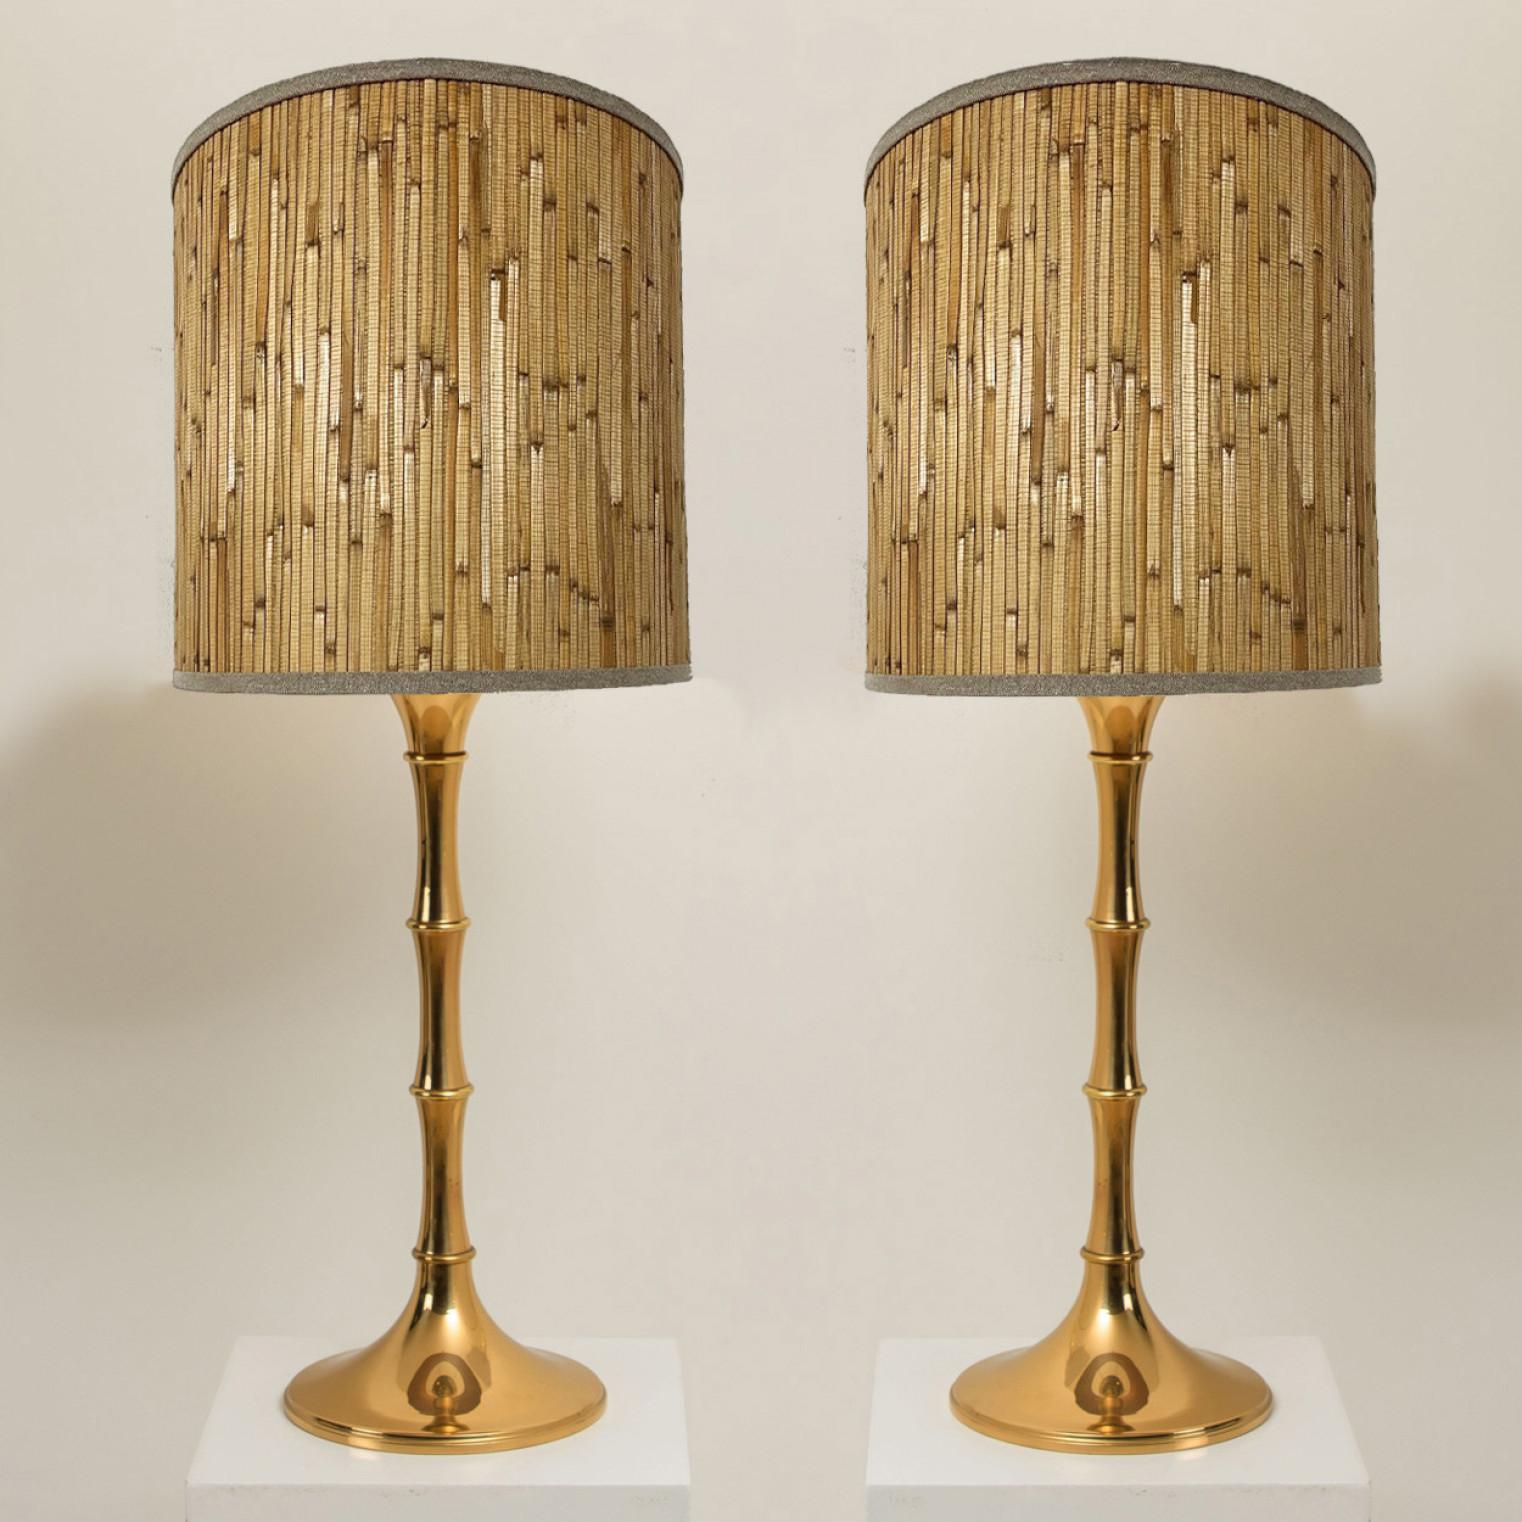 Mid-Century Modern Pair of Table Lamps Gold Brass and Bamboo by Ingo Maurer, Europe, Germany, 1968 For Sale